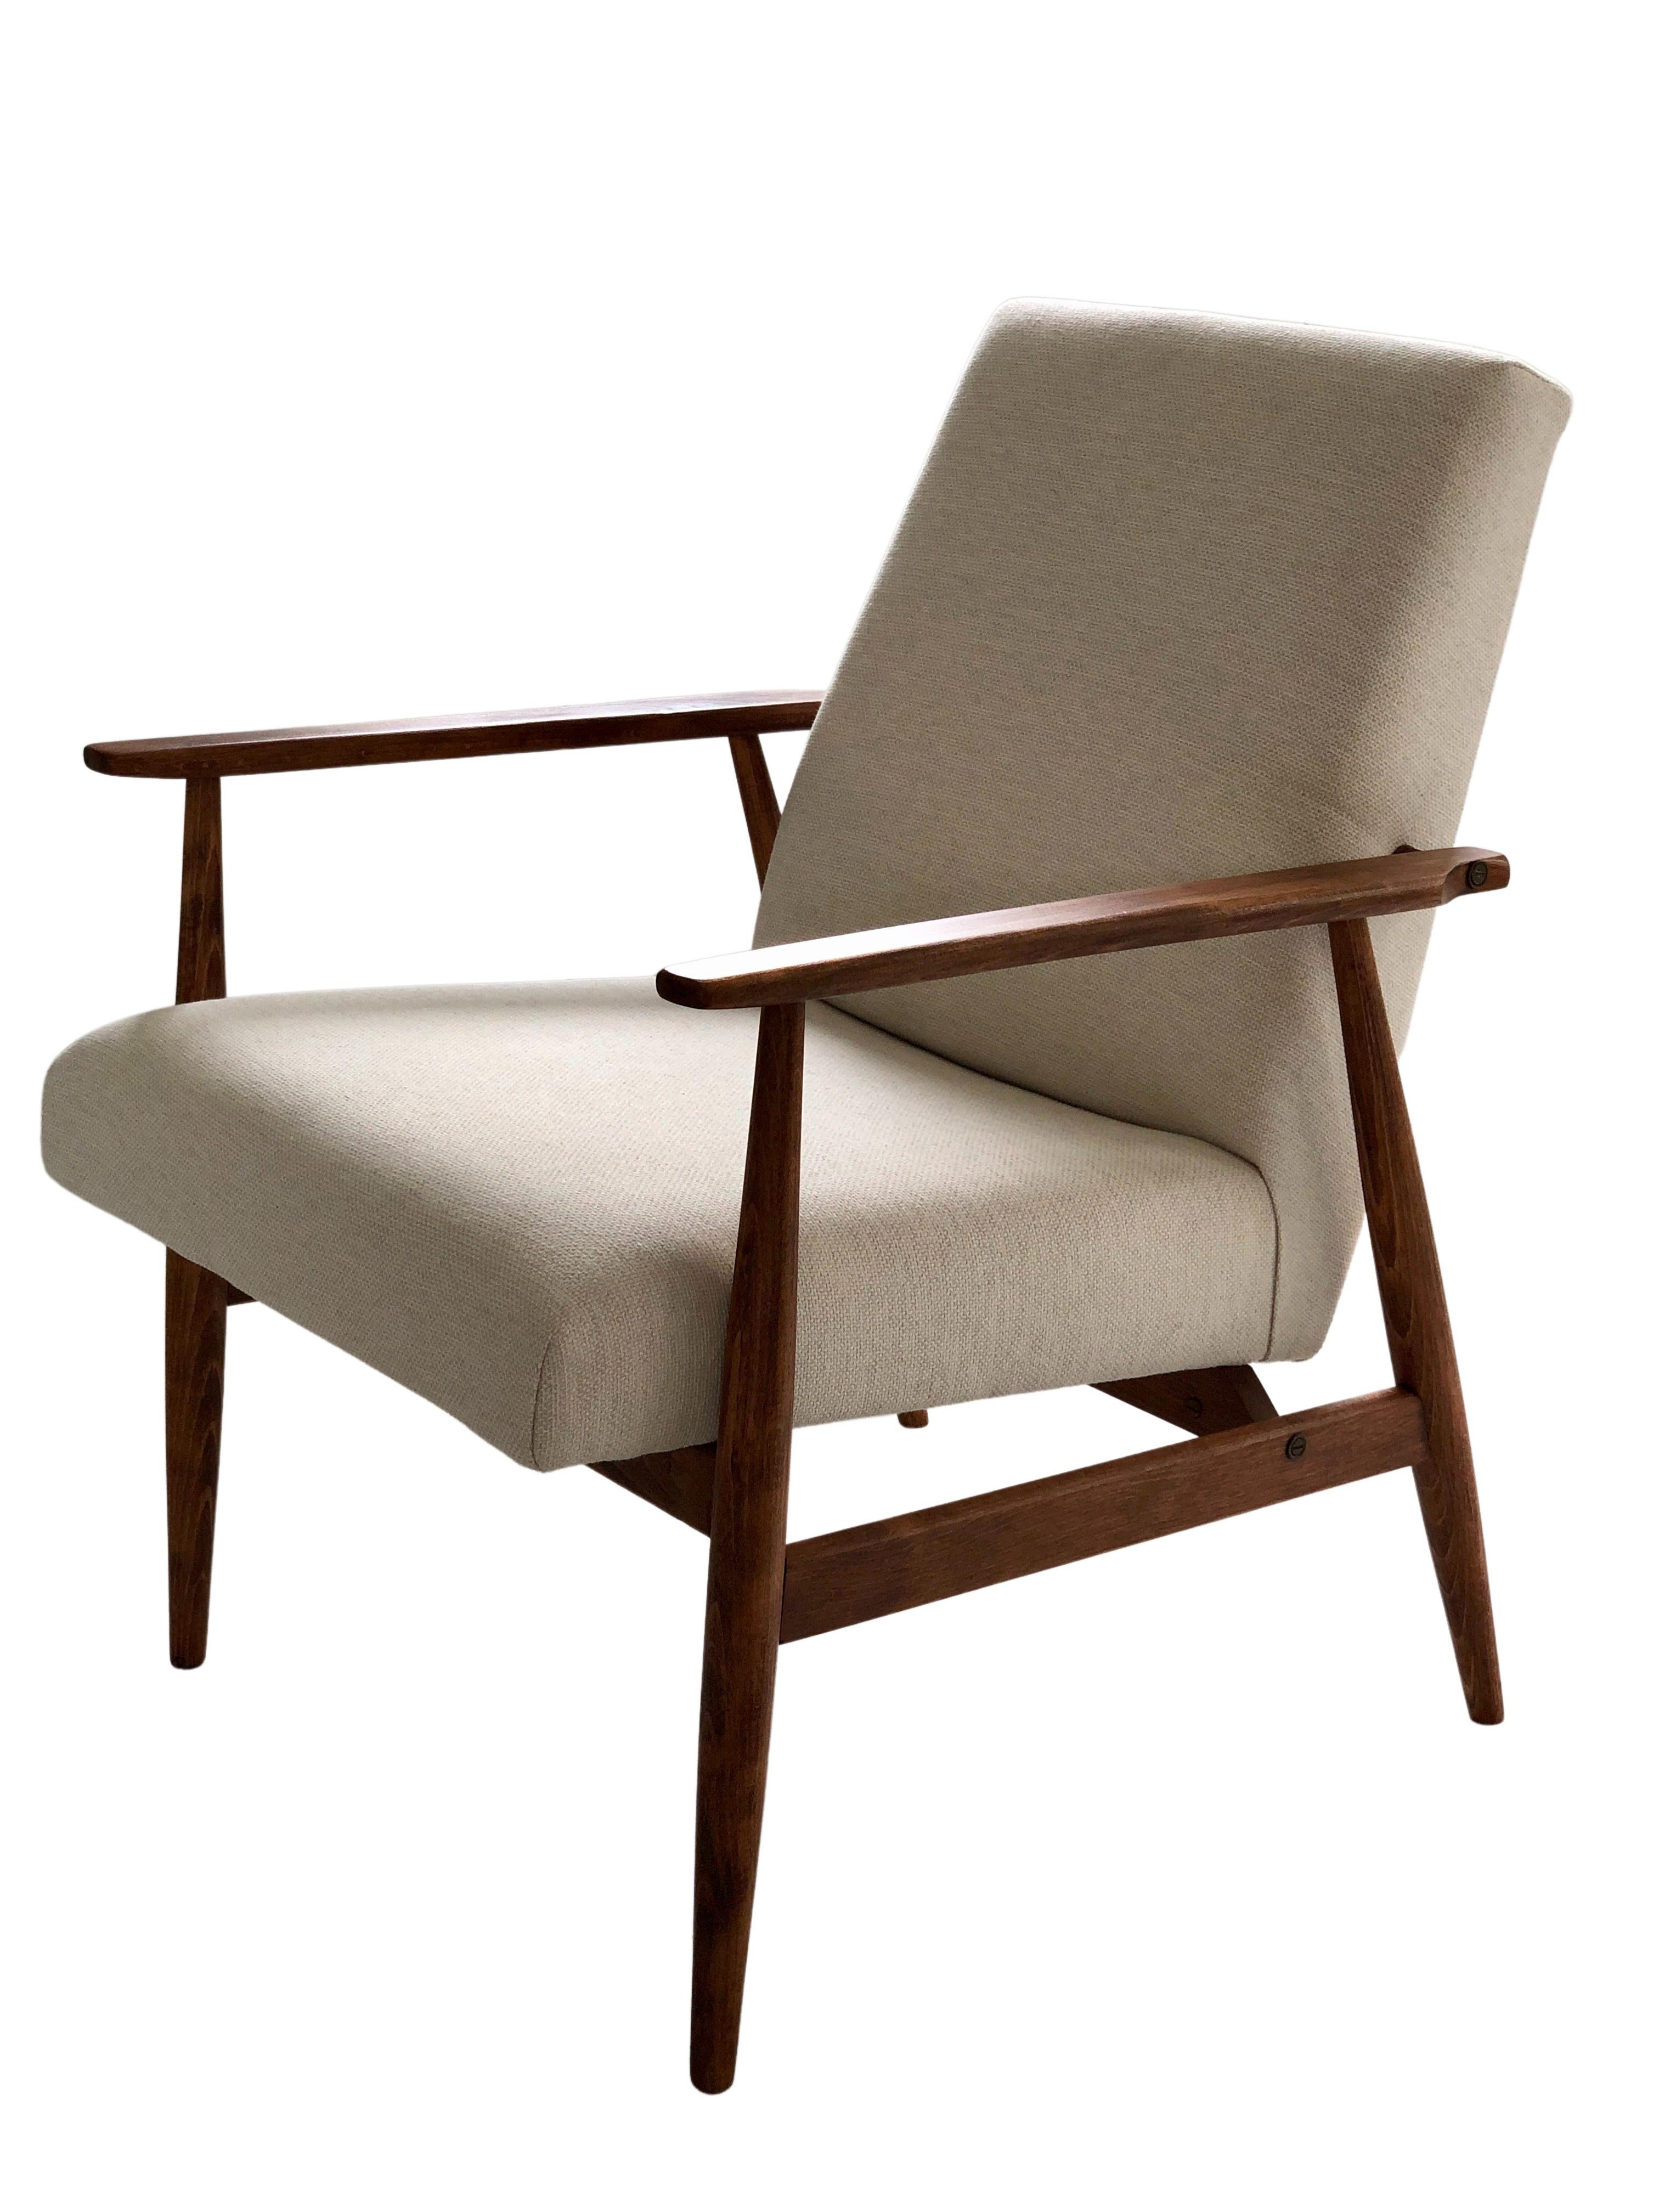 The set of two armchairs designed by Henryk Lis. The structure is made of beech wood in a warm walnut color, finished with a semi-matte satin varnish. The upholstery is heavy weight natural cotton fabric in a beige color. The set has been completely